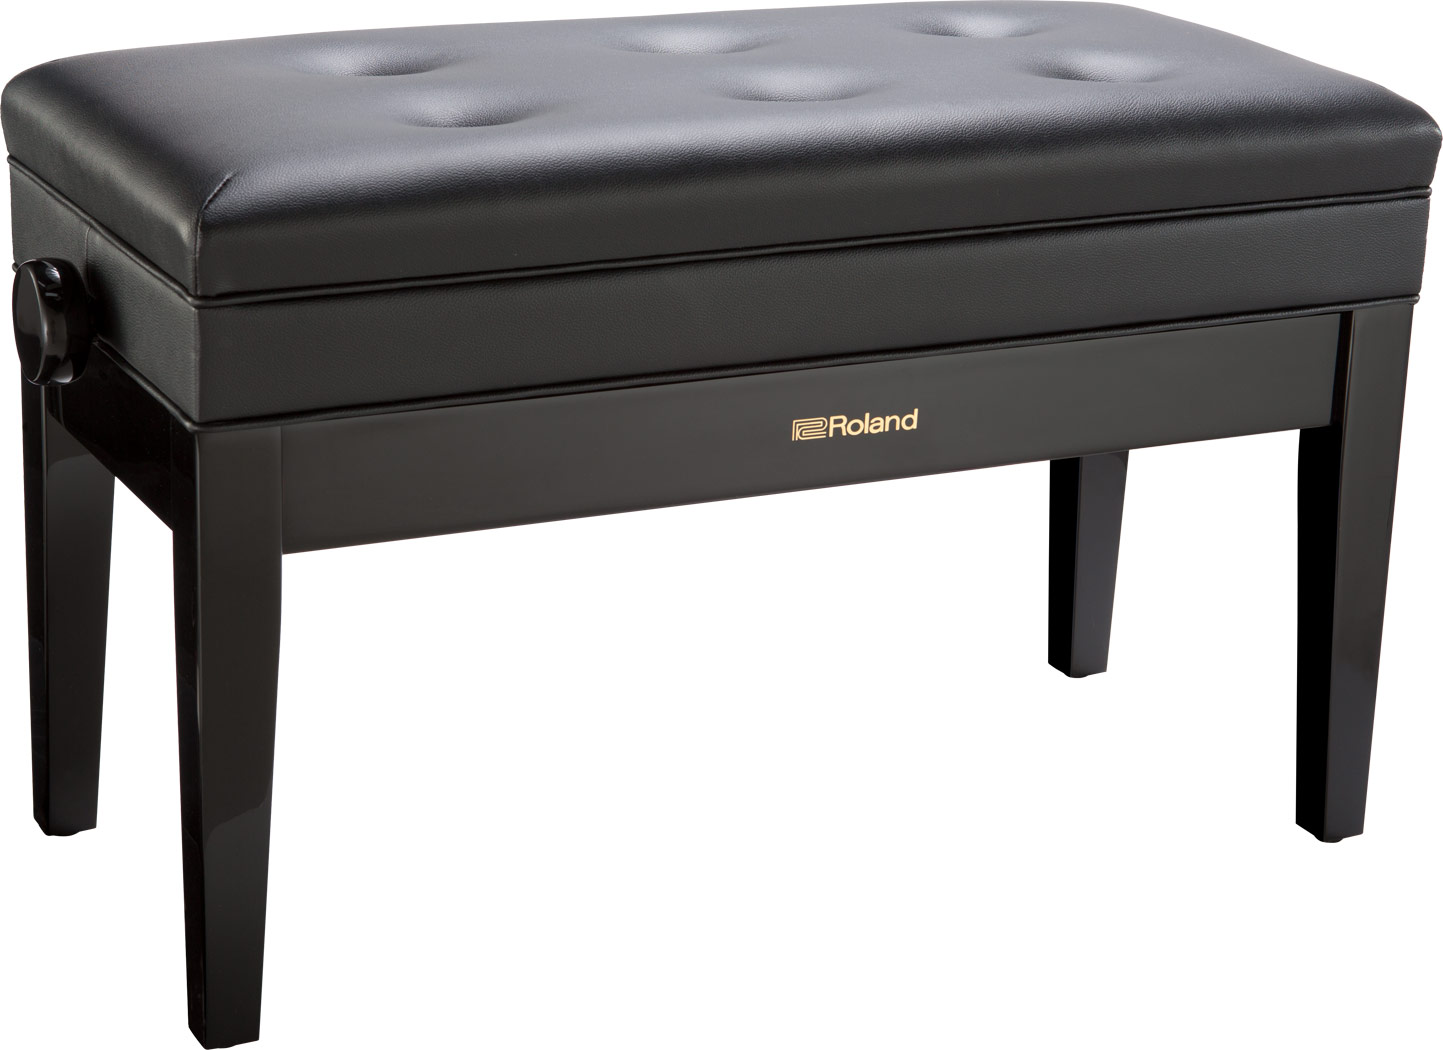 Roland duet piano bench with adjustable cushioned seat and storage compartment - RPB-D400PE